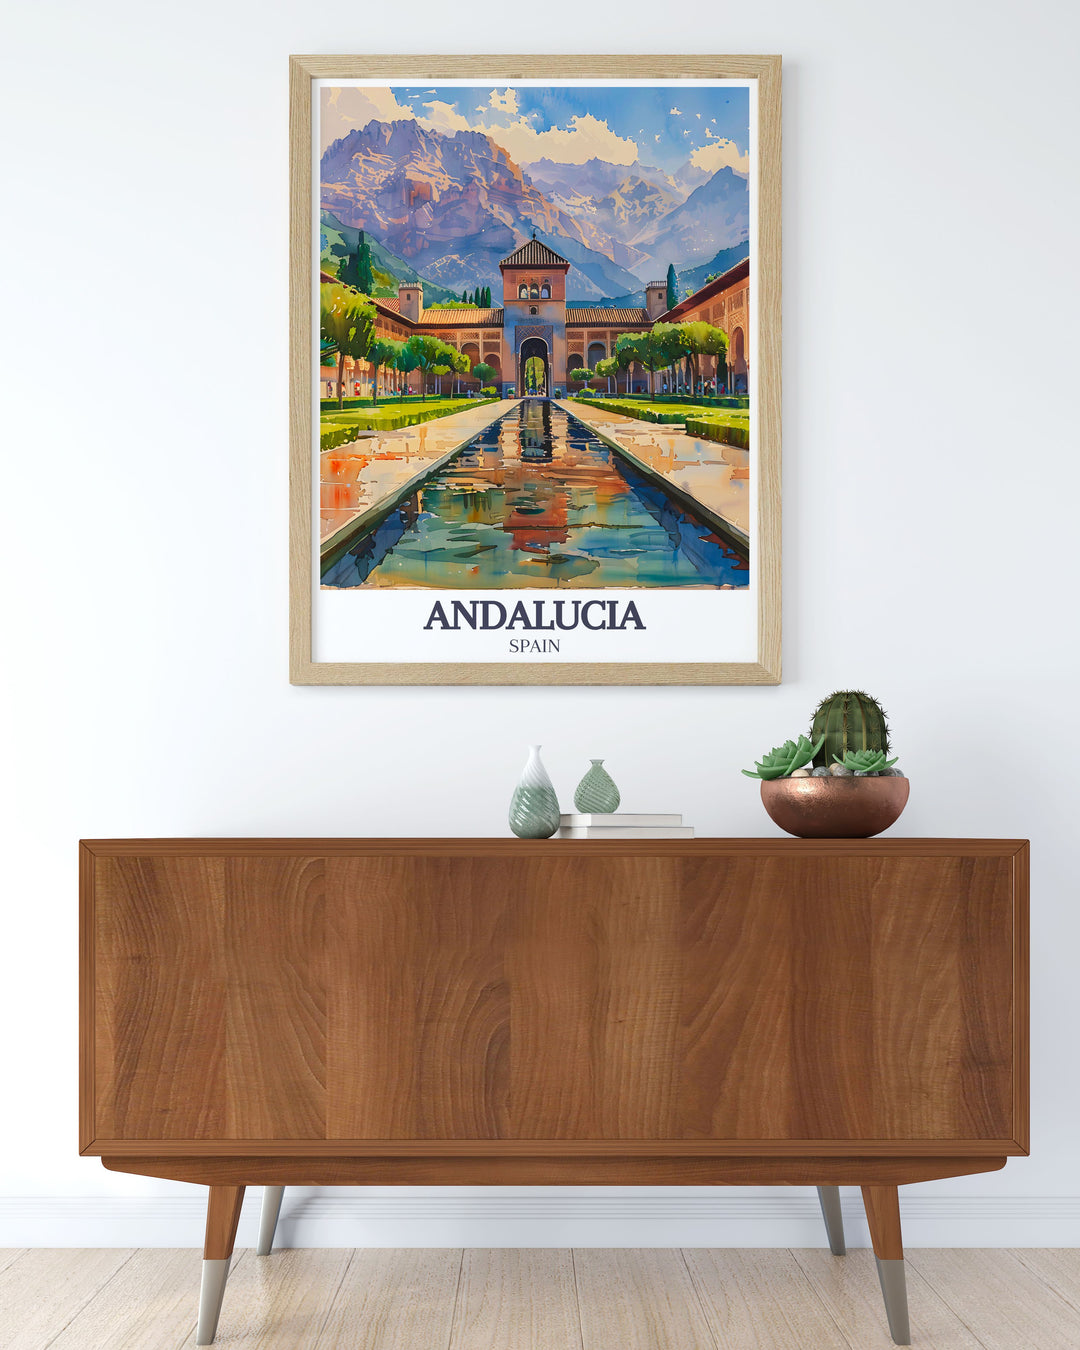 Featuring the Sierra Nevada Mountains in Andalucia, this art print highlights the majestic peaks and serene landscapes, making it an ideal piece for nature lovers and home decor enthusiasts.